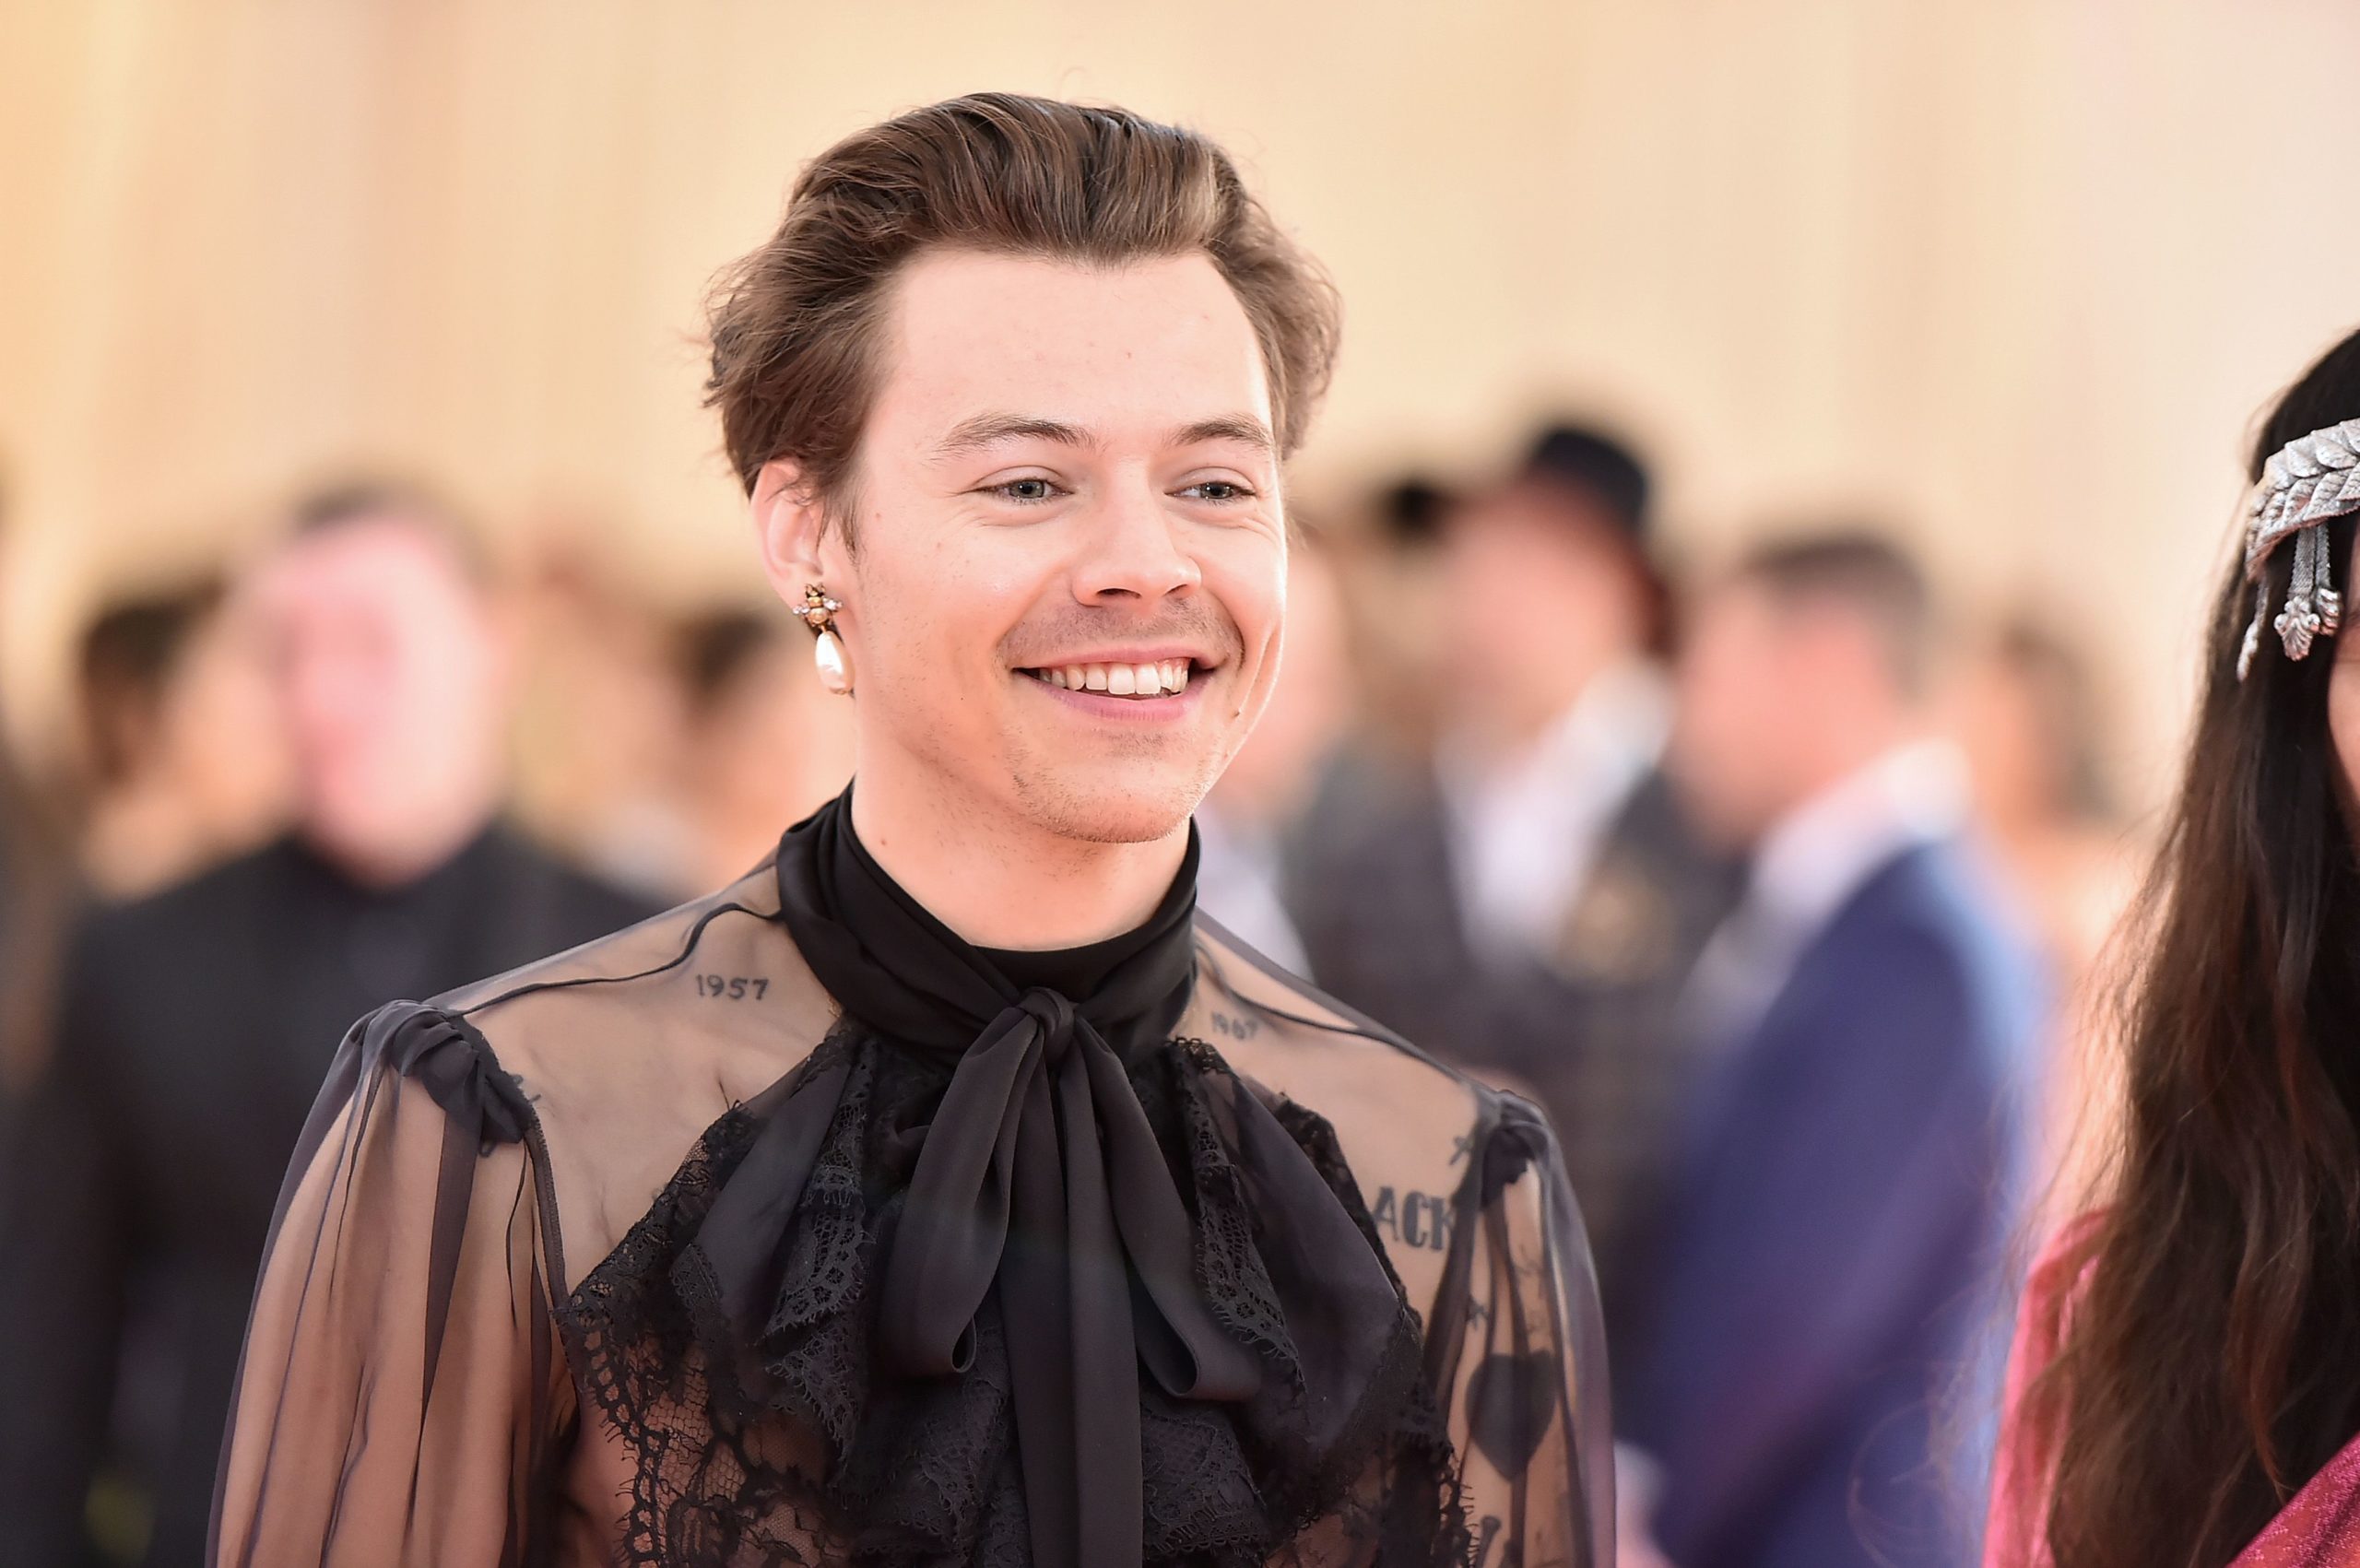 Harry Styles: Know About His Early Life, Career And Other Facts